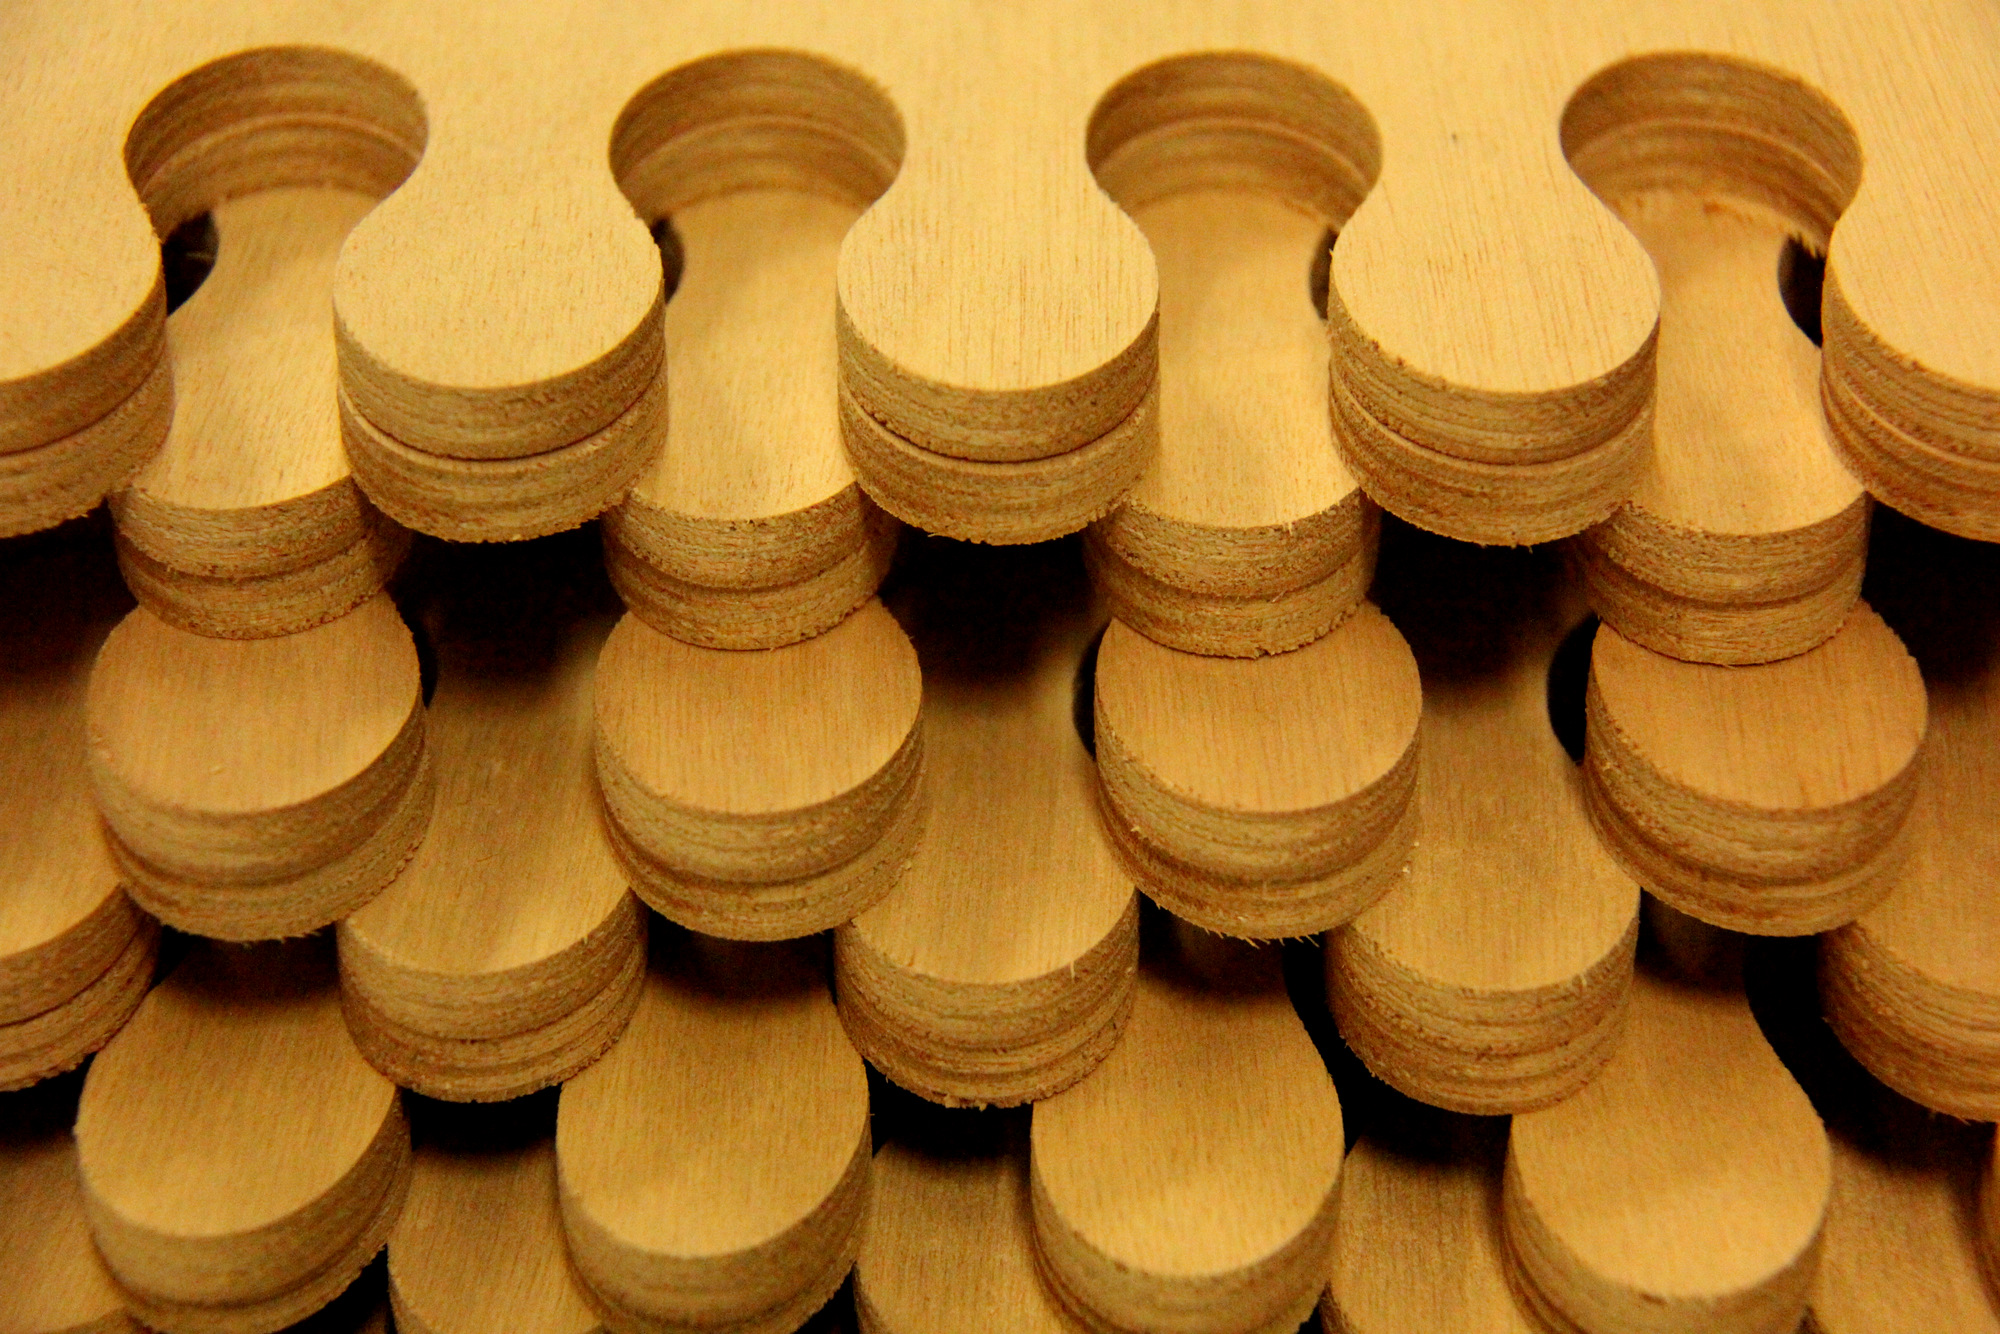 Puzzle Joints at Chesapeake Light Craft